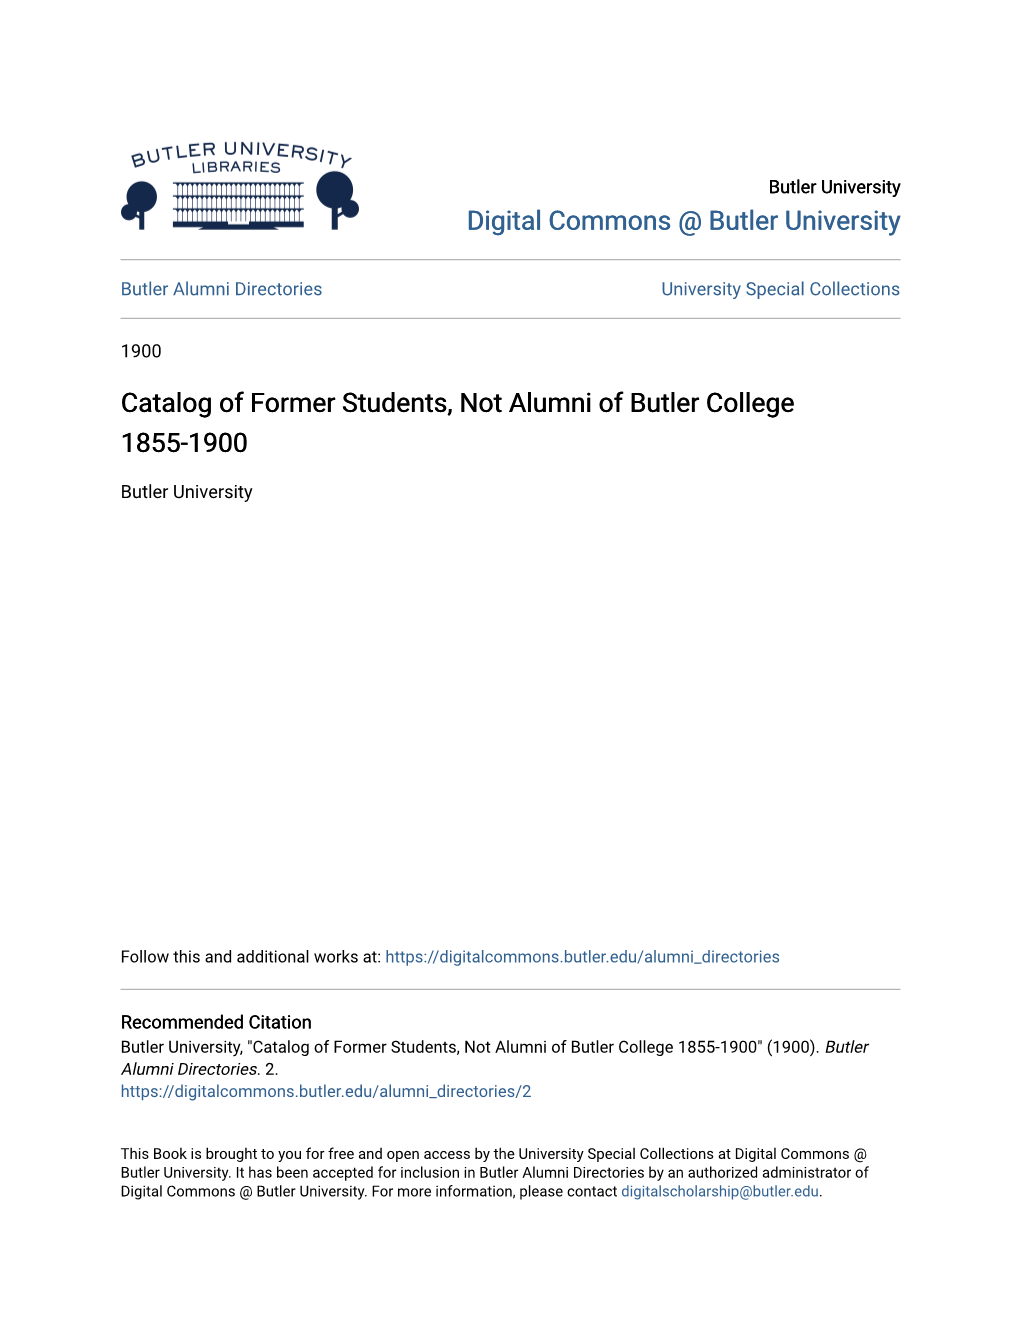 Catalog of Former Students, Not Alumni of Butler College 1855-1900